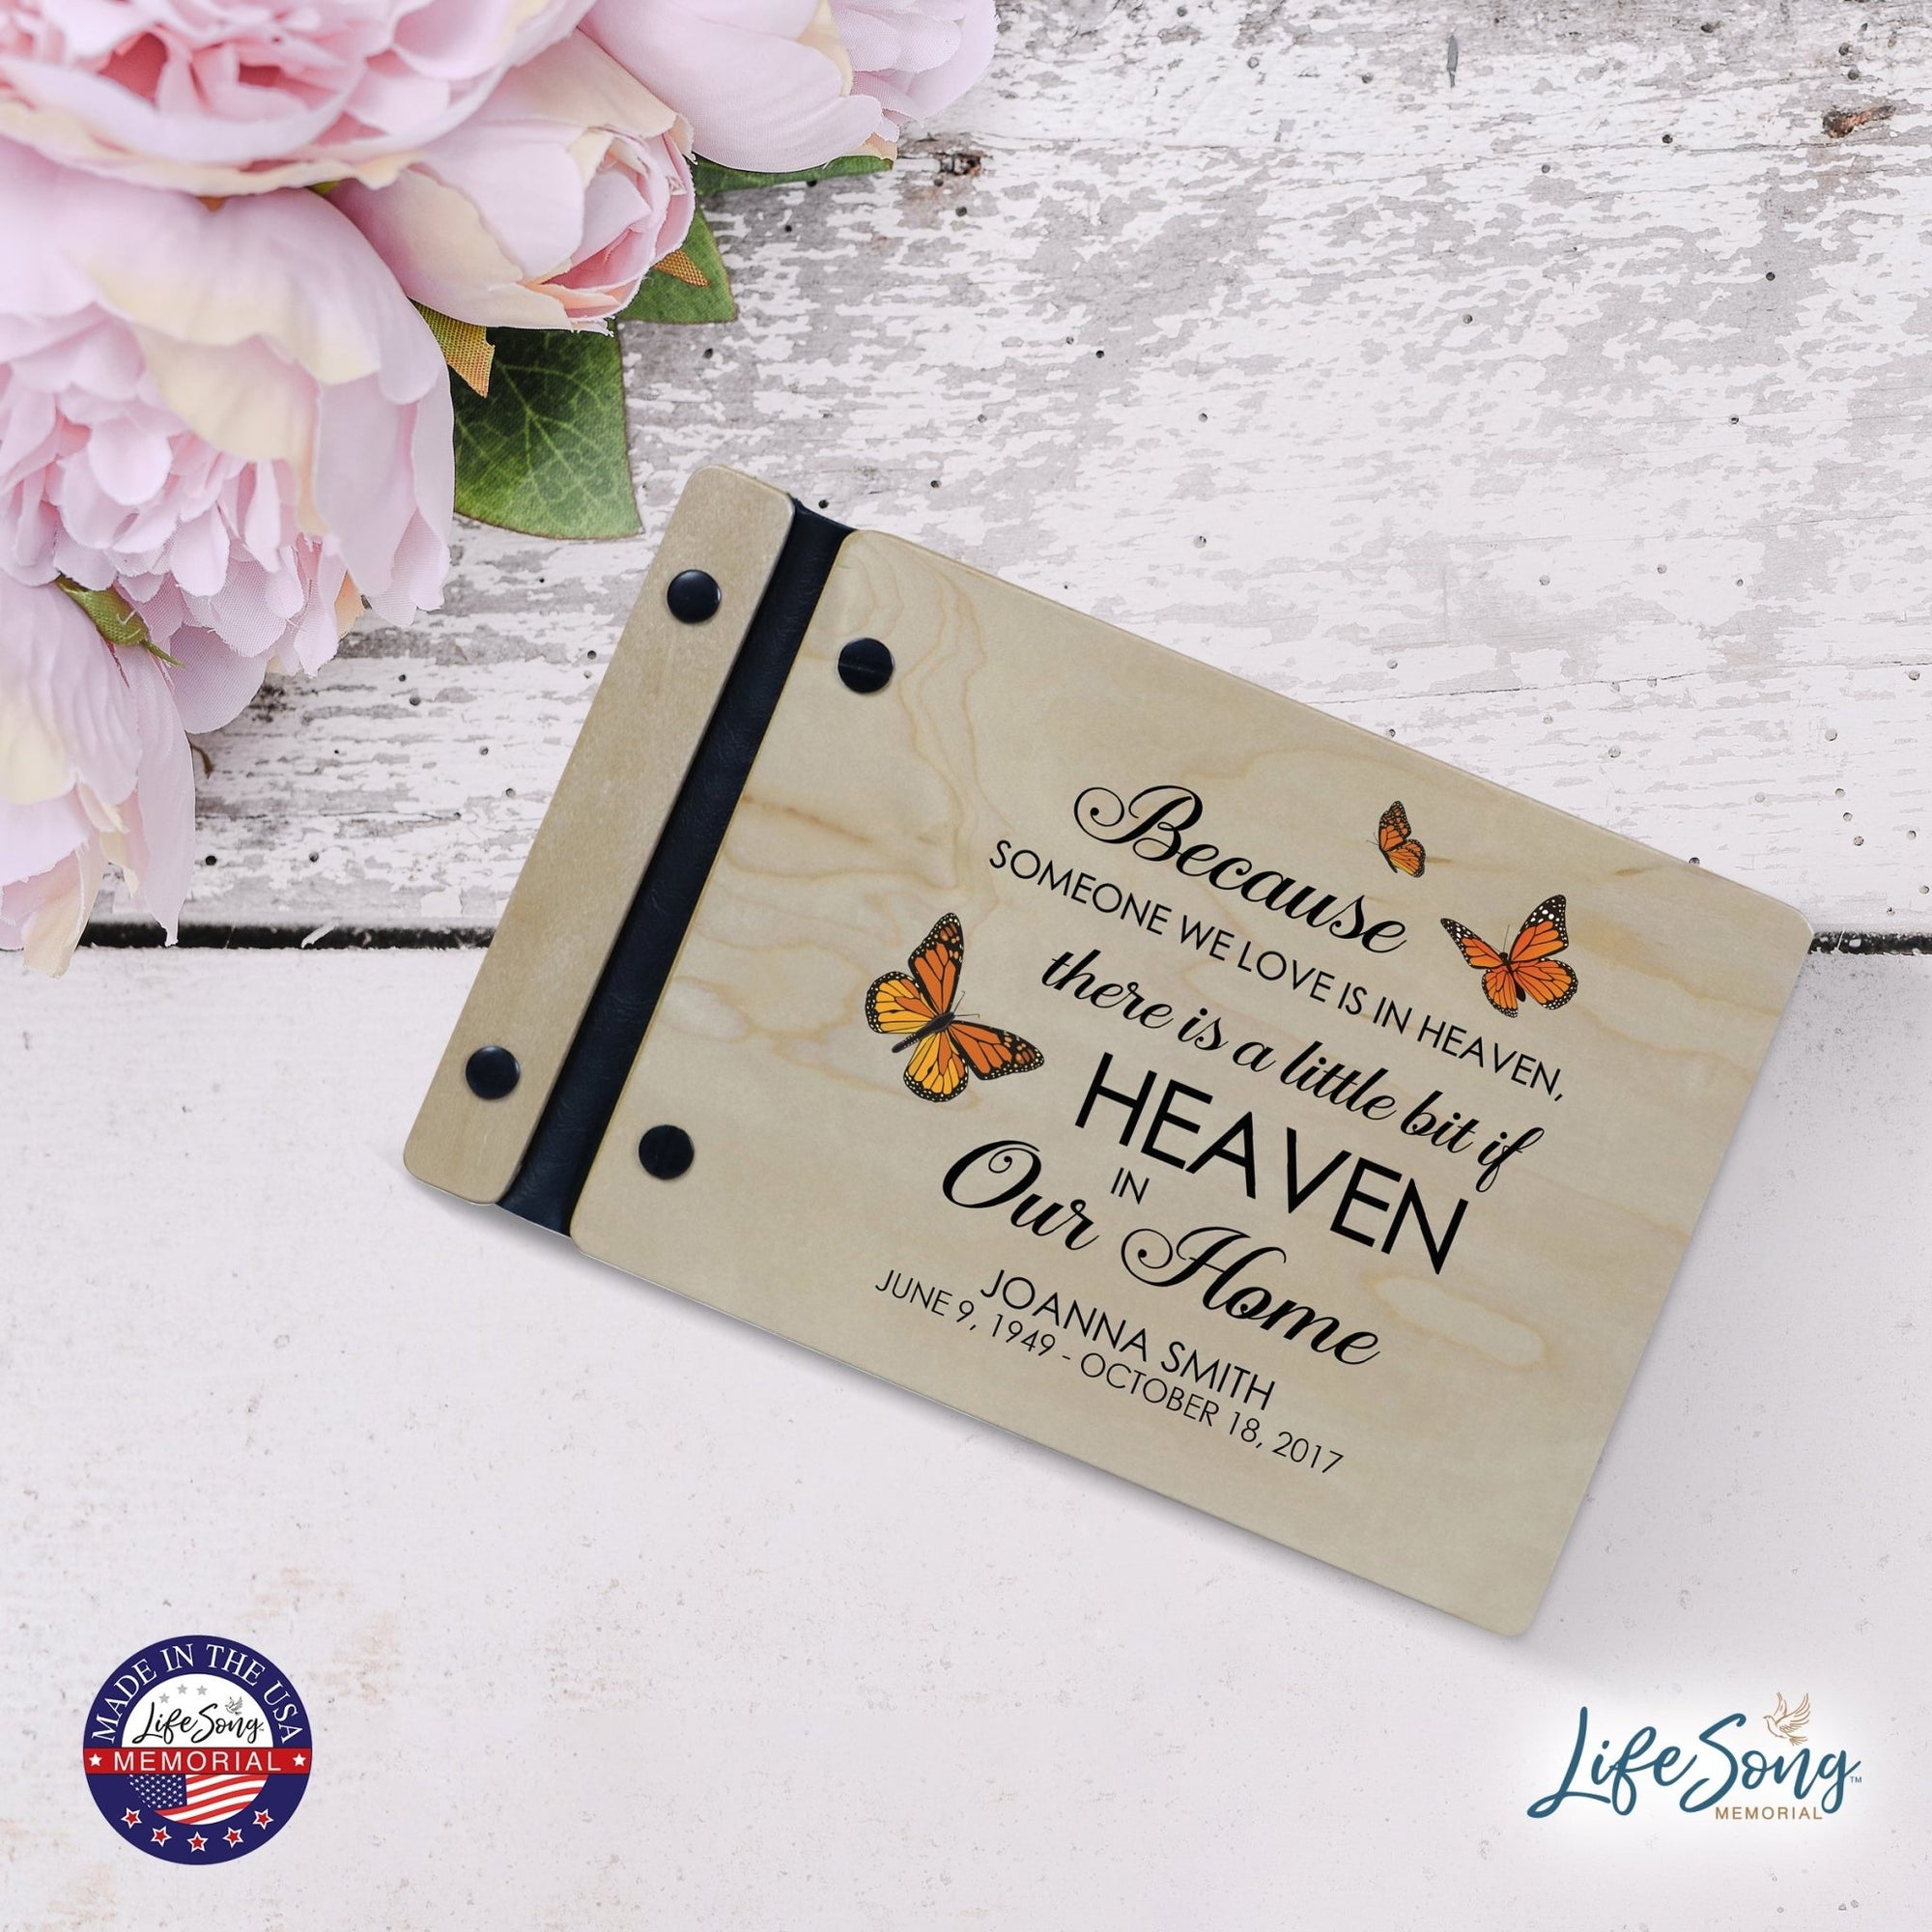 Personalized Small Wooden Memorial Guestbook 9.375x6 - Because Someone We Love (Ivory) - LifeSong Milestones